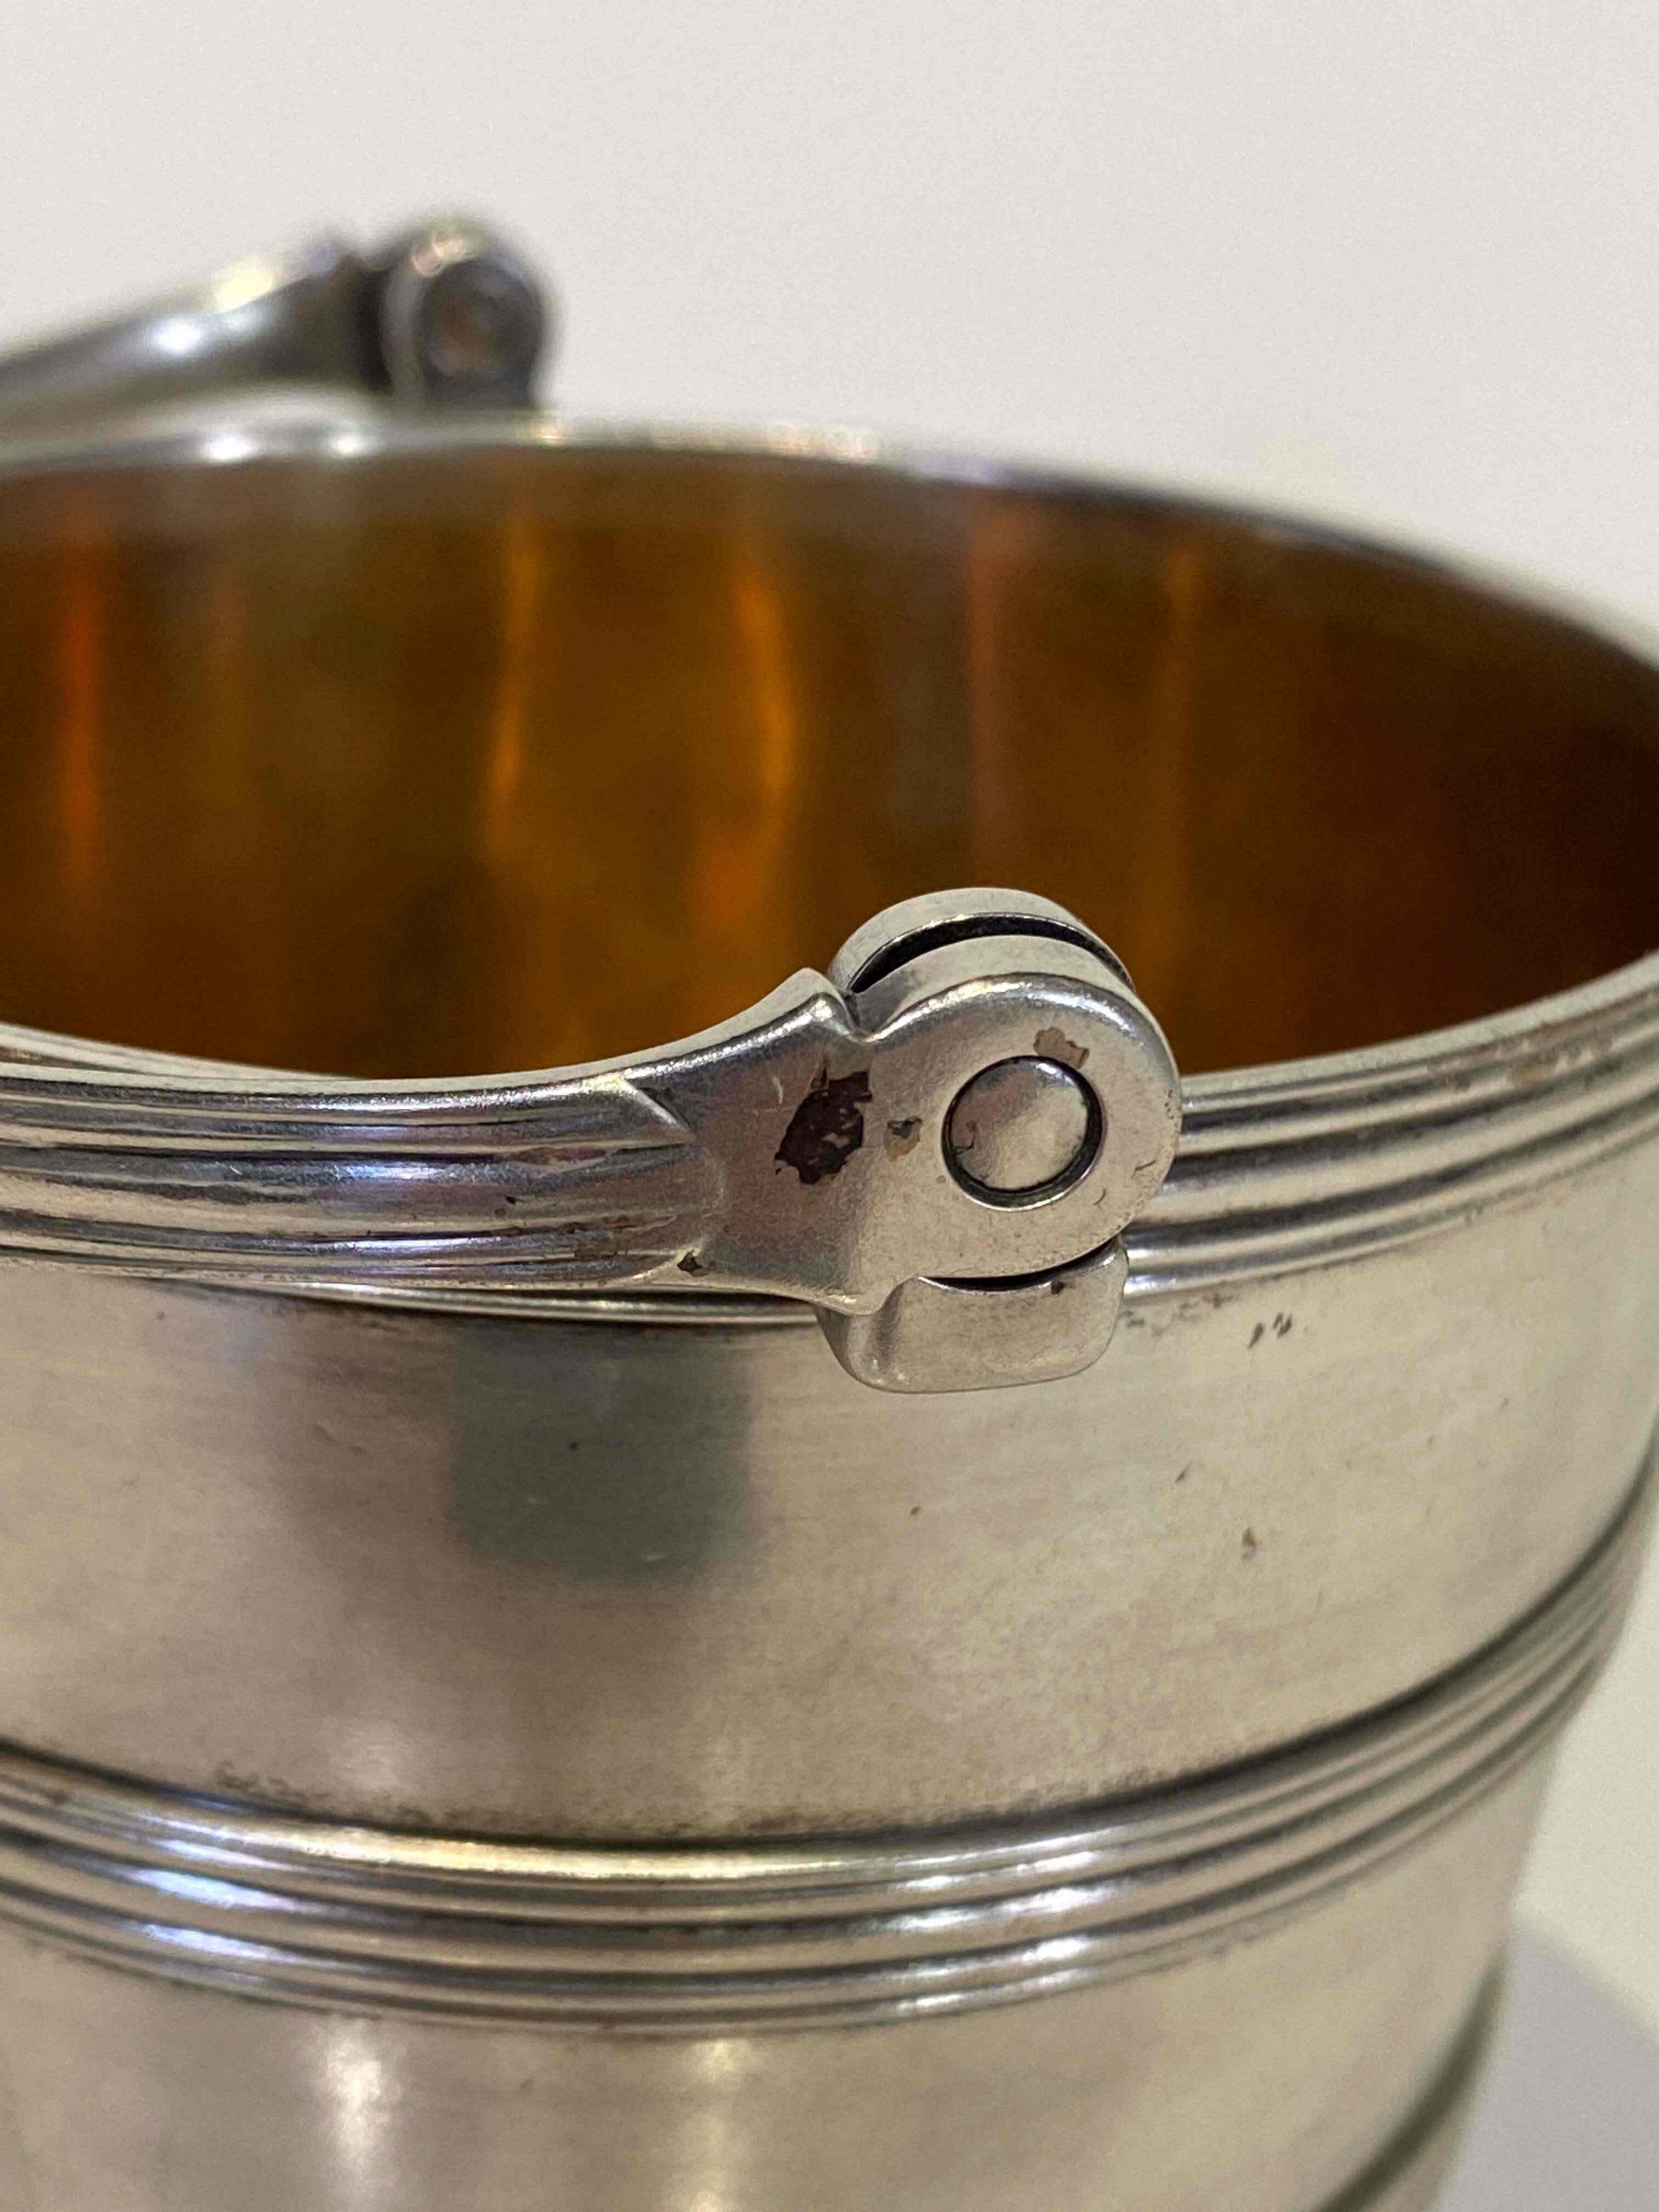 A Colonial Indian silver ice bucket, maker's initial 'R', 19th century